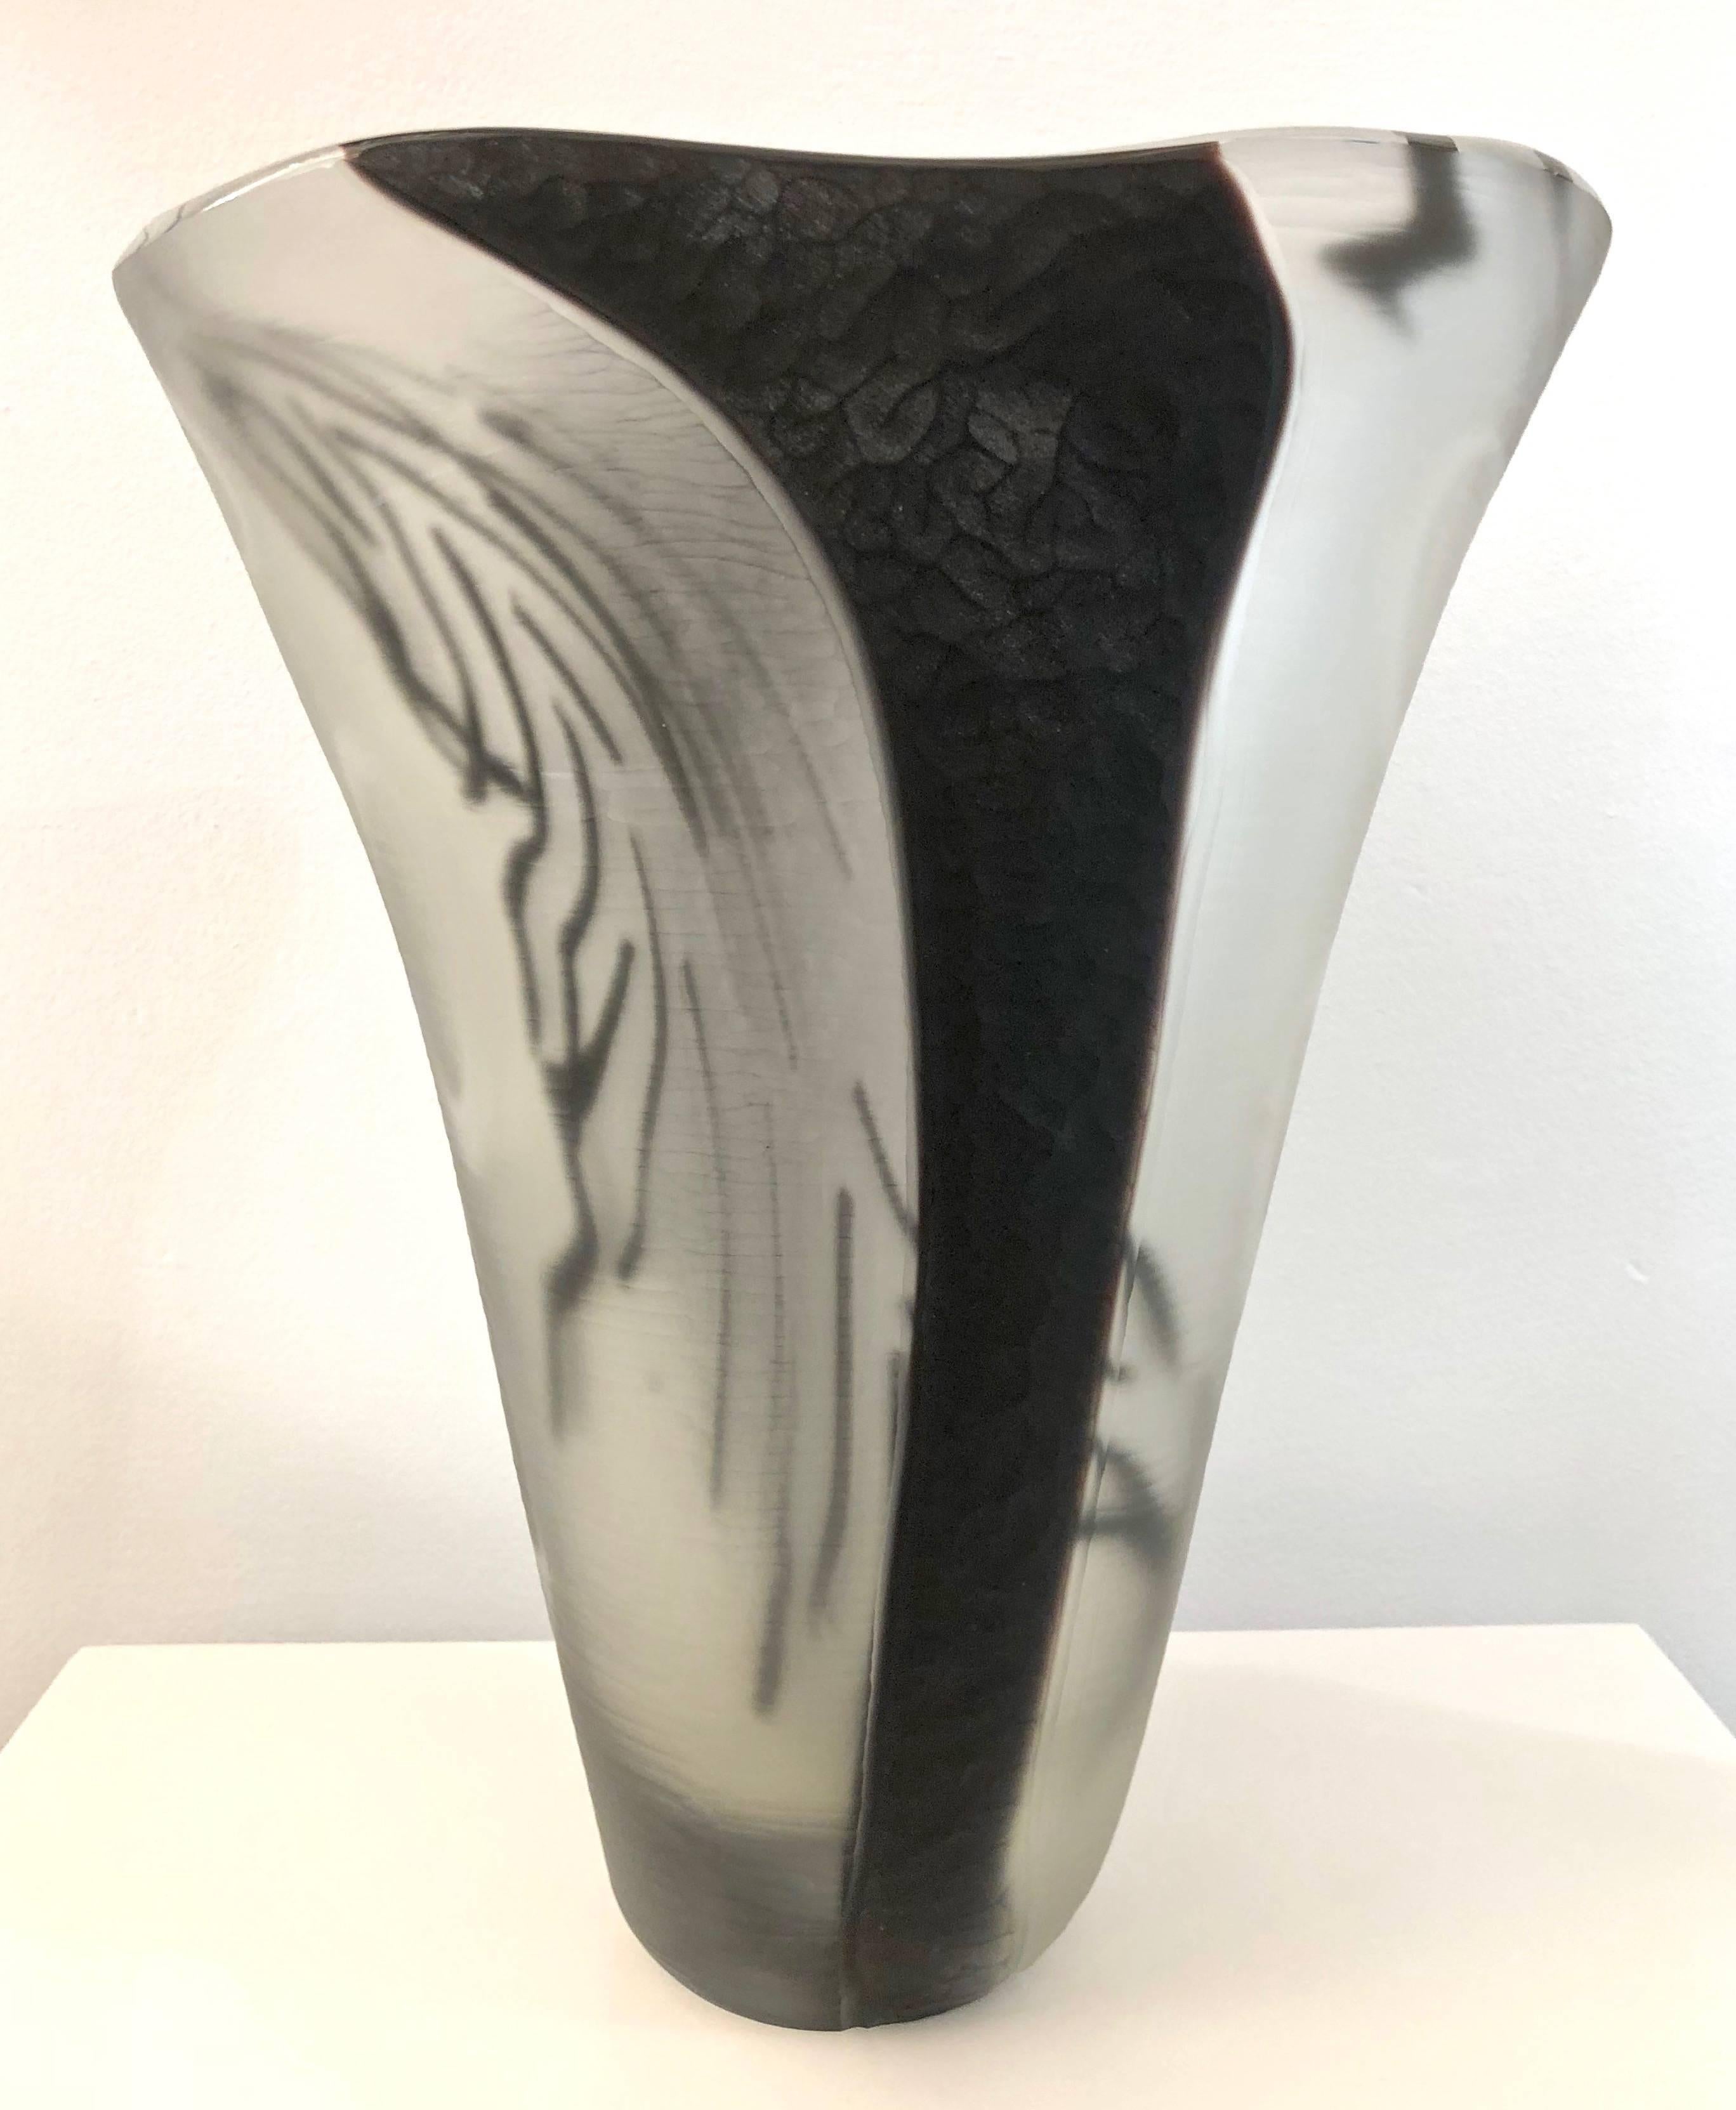 Monumental Contemporary Italian Art Glass vase, one of a kind Work of Art signed by Davide Donà. The mouth blown execution is extraordinary considering the important size and weight. The difficult to achieve decoration is realized with an overlaid